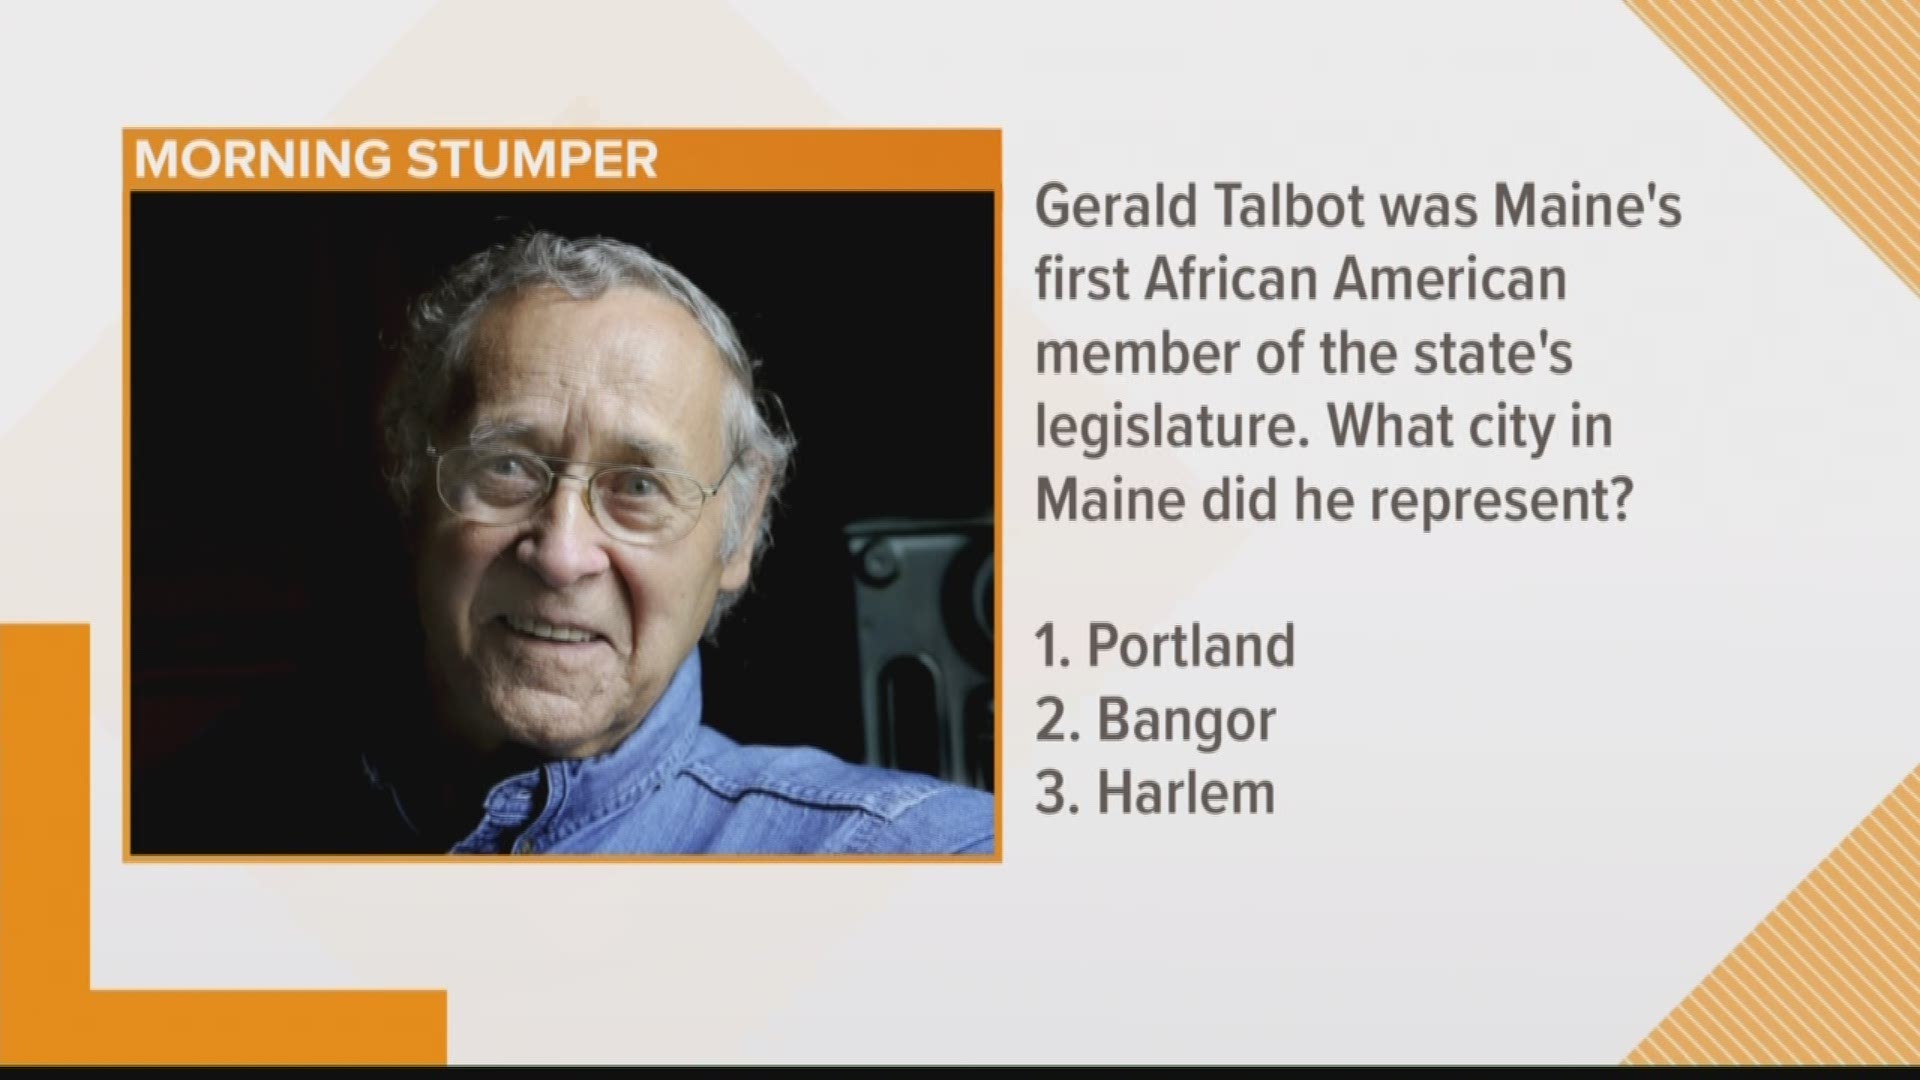 Talbot was the first African-American member of the state legislature, and for today's stumper we asked: Which city in Maine did Gerald Talbot represent in the House of Representatives?